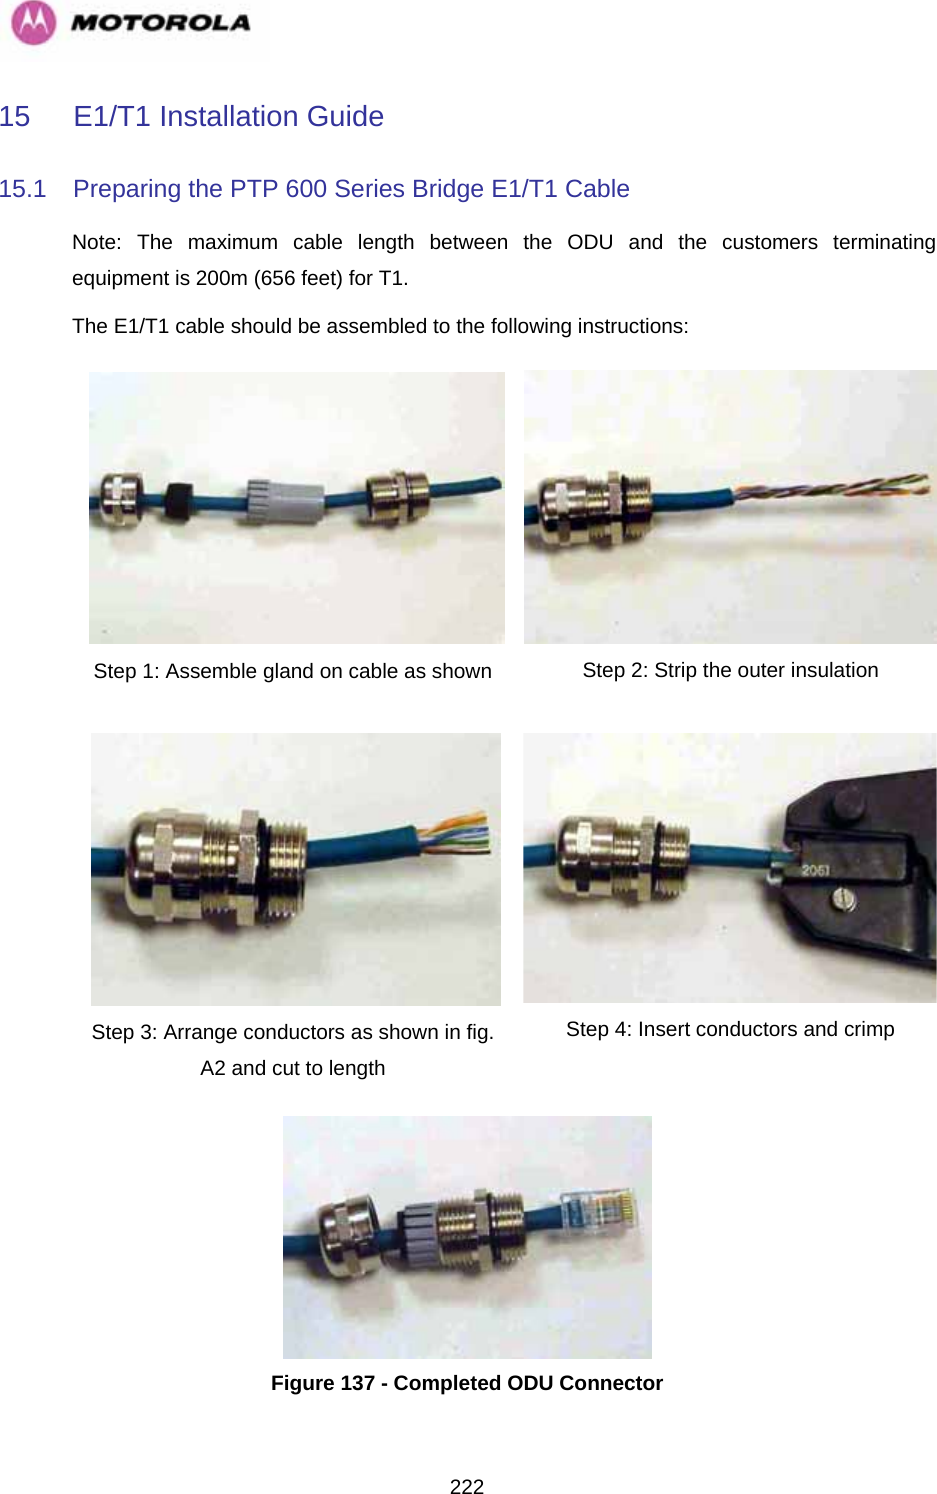   22215 E1/T1 Installation Guide 15.1  Preparing the PTP 600 Series Bridge E1/T1 Cable Note: The maximum cable length between the ODU and the customers terminating equipment is 200m (656 feet) for T1. The E1/T1 cable should be assembled to the following instructions: Step 1: Assemble gland on cable as shown  Step 2: Strip the outer insulation Step 3: Arrange conductors as shown in fig. A2 and cut to length Step 4: Insert conductors and crimp   Figure 137 - Completed ODU Connector 